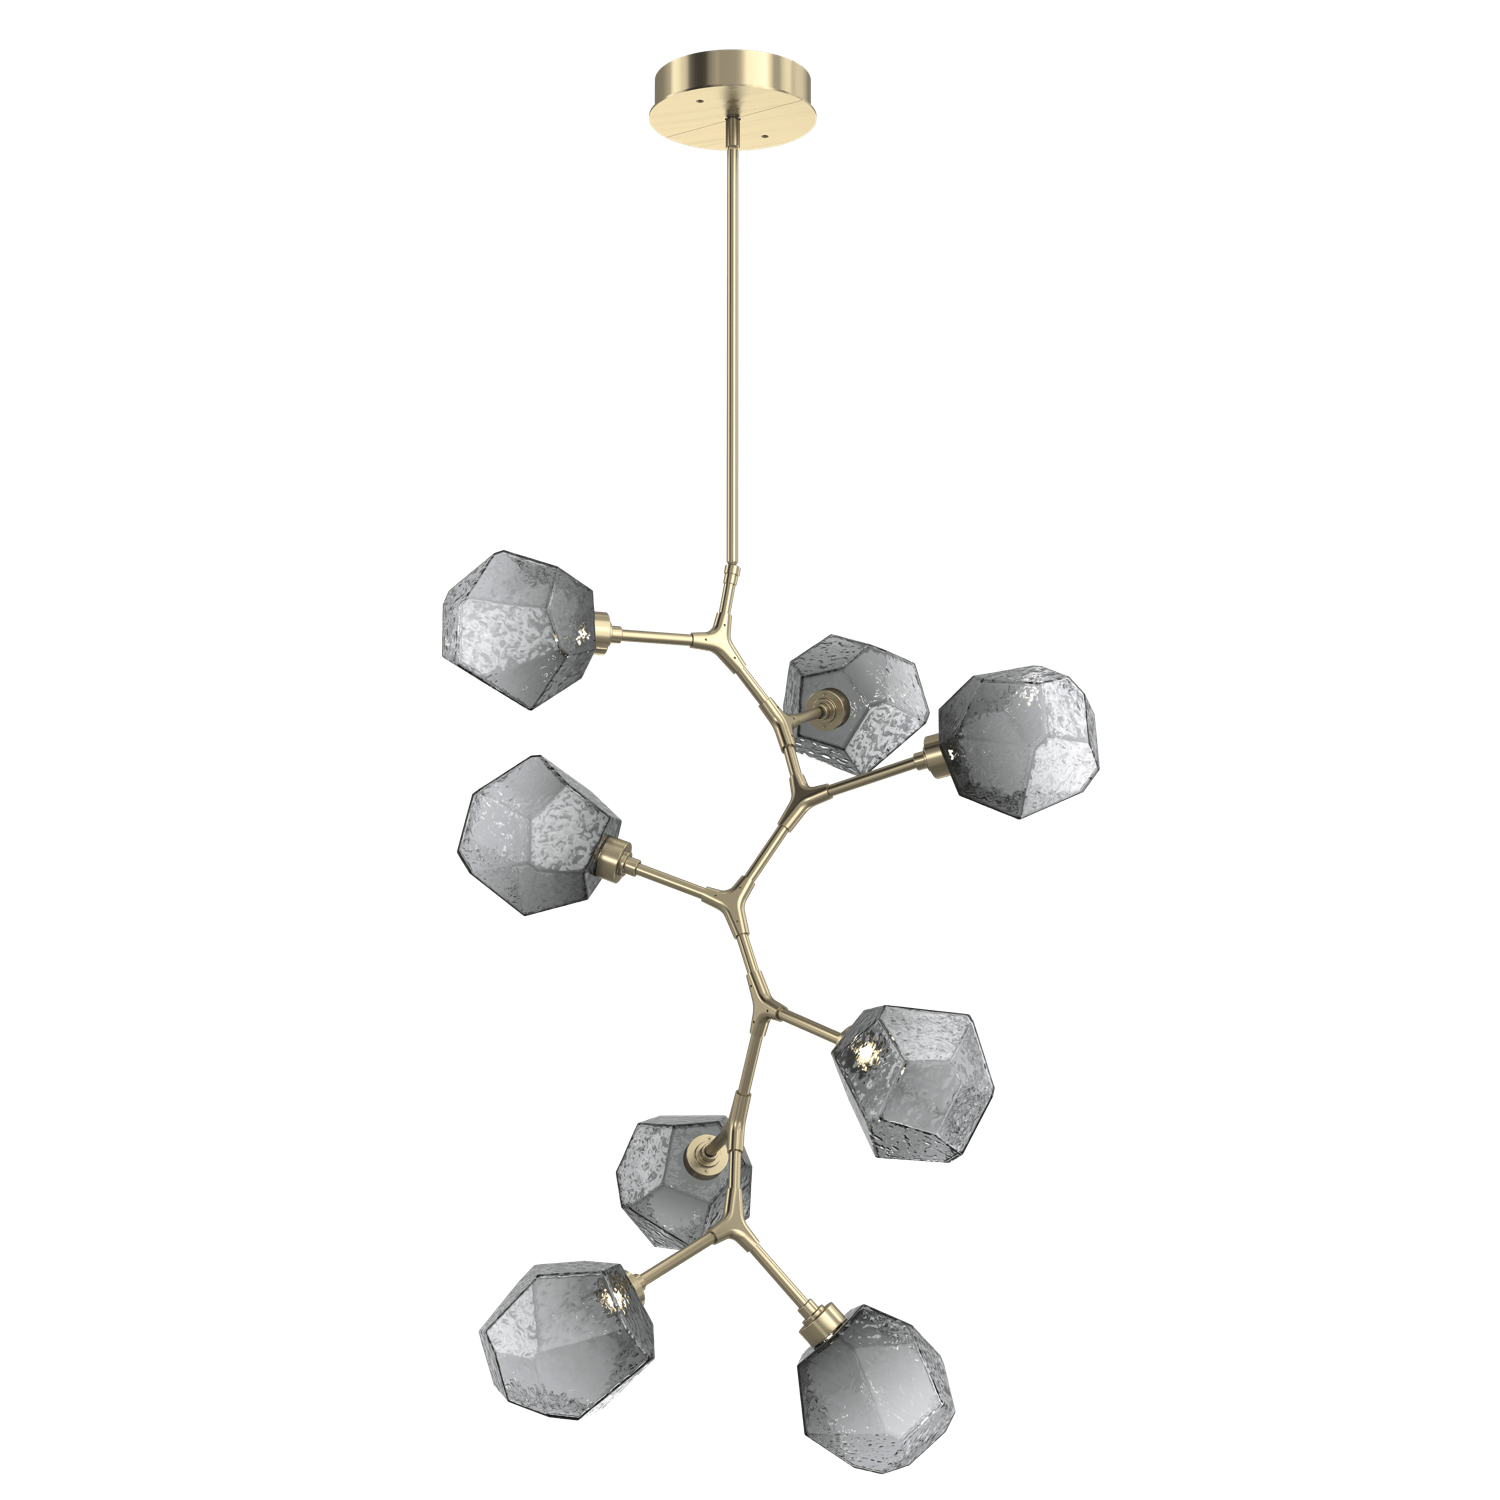 CHB0039-VB-HB-S-Hammerton-Studio-Gem-8-light-modern-vine-chandelier-with-heritage-brass-finish-and-smoke-blown-glass-shades-and-LED-lamping